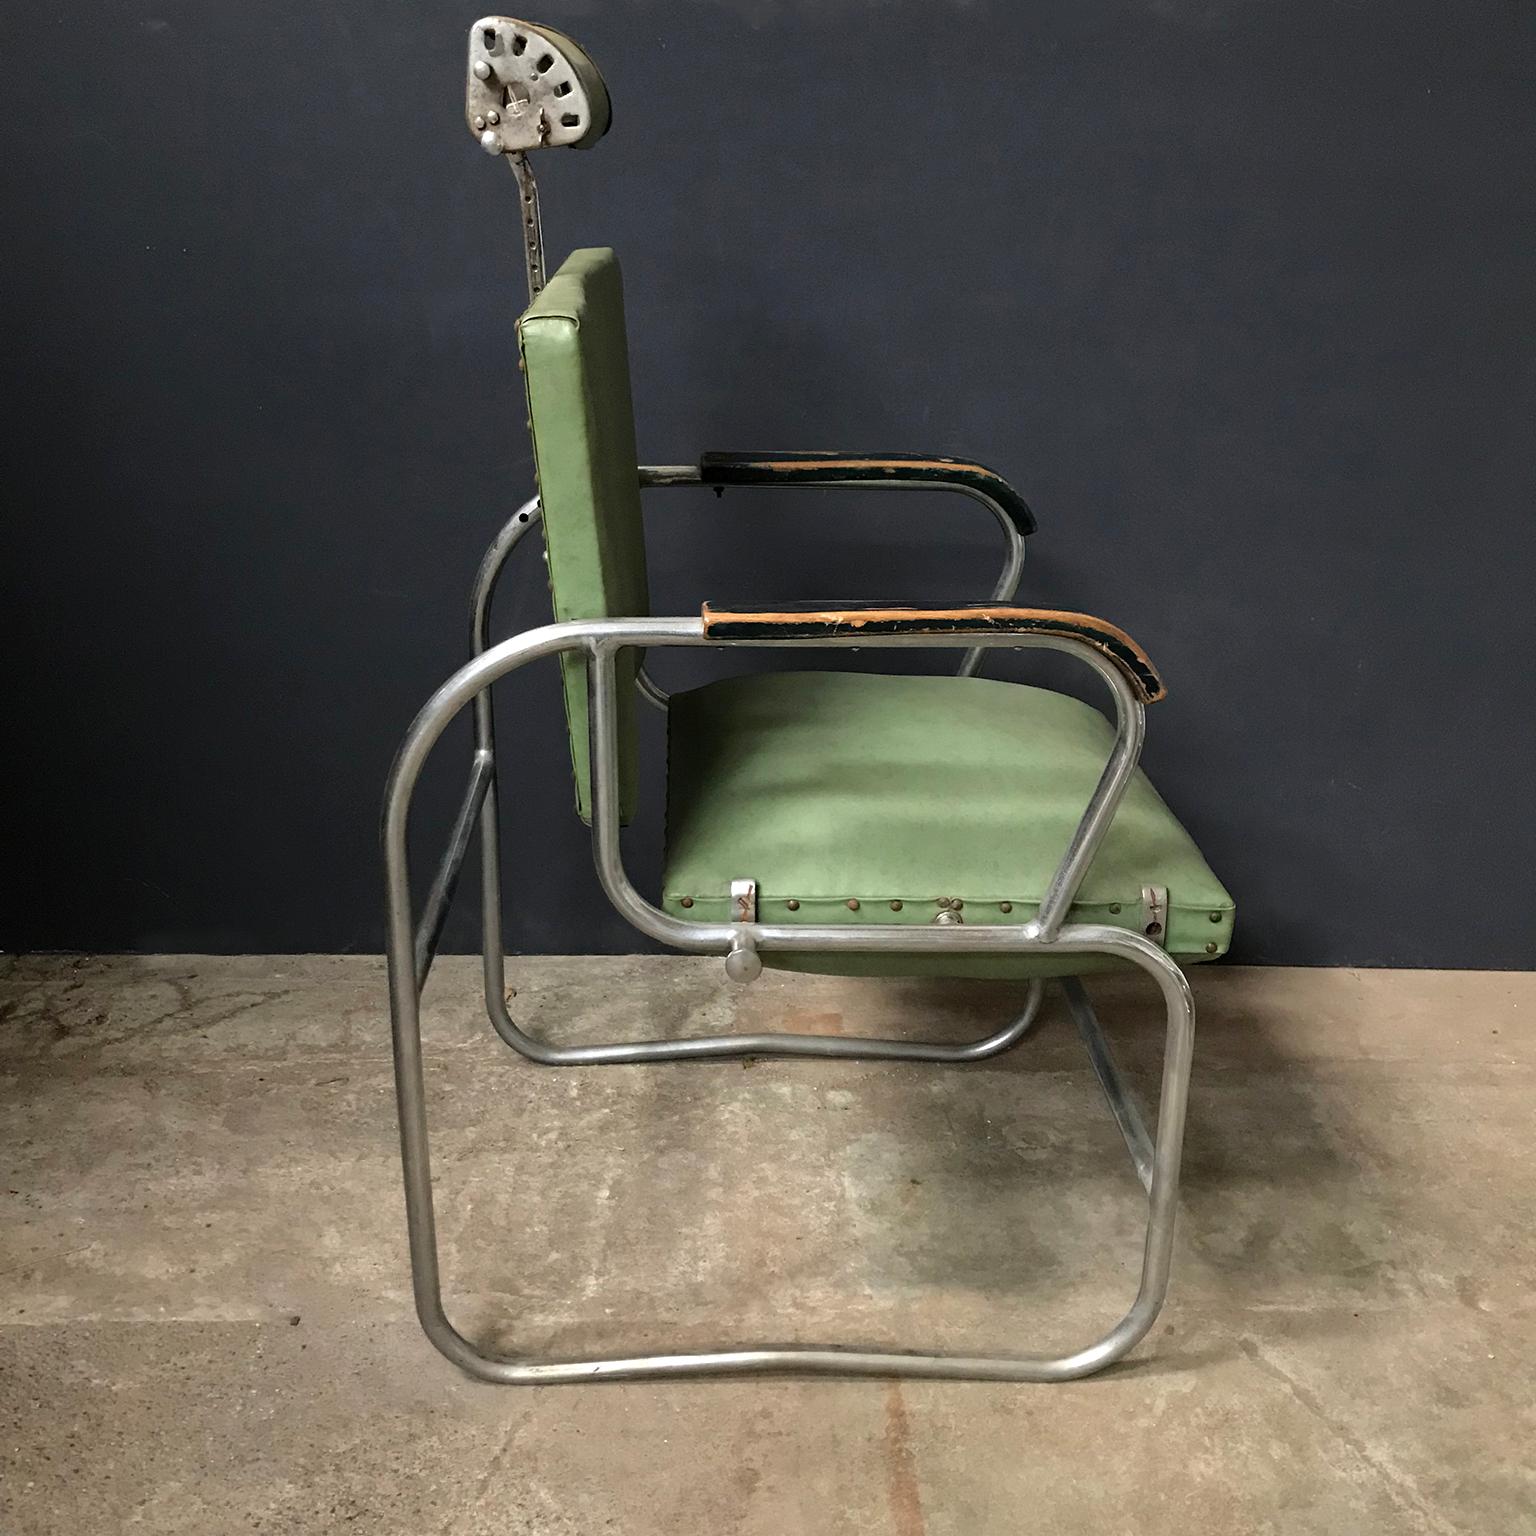 French Original Barber Chair with Original Green Upholstery, Rotated Seat, circa 1950